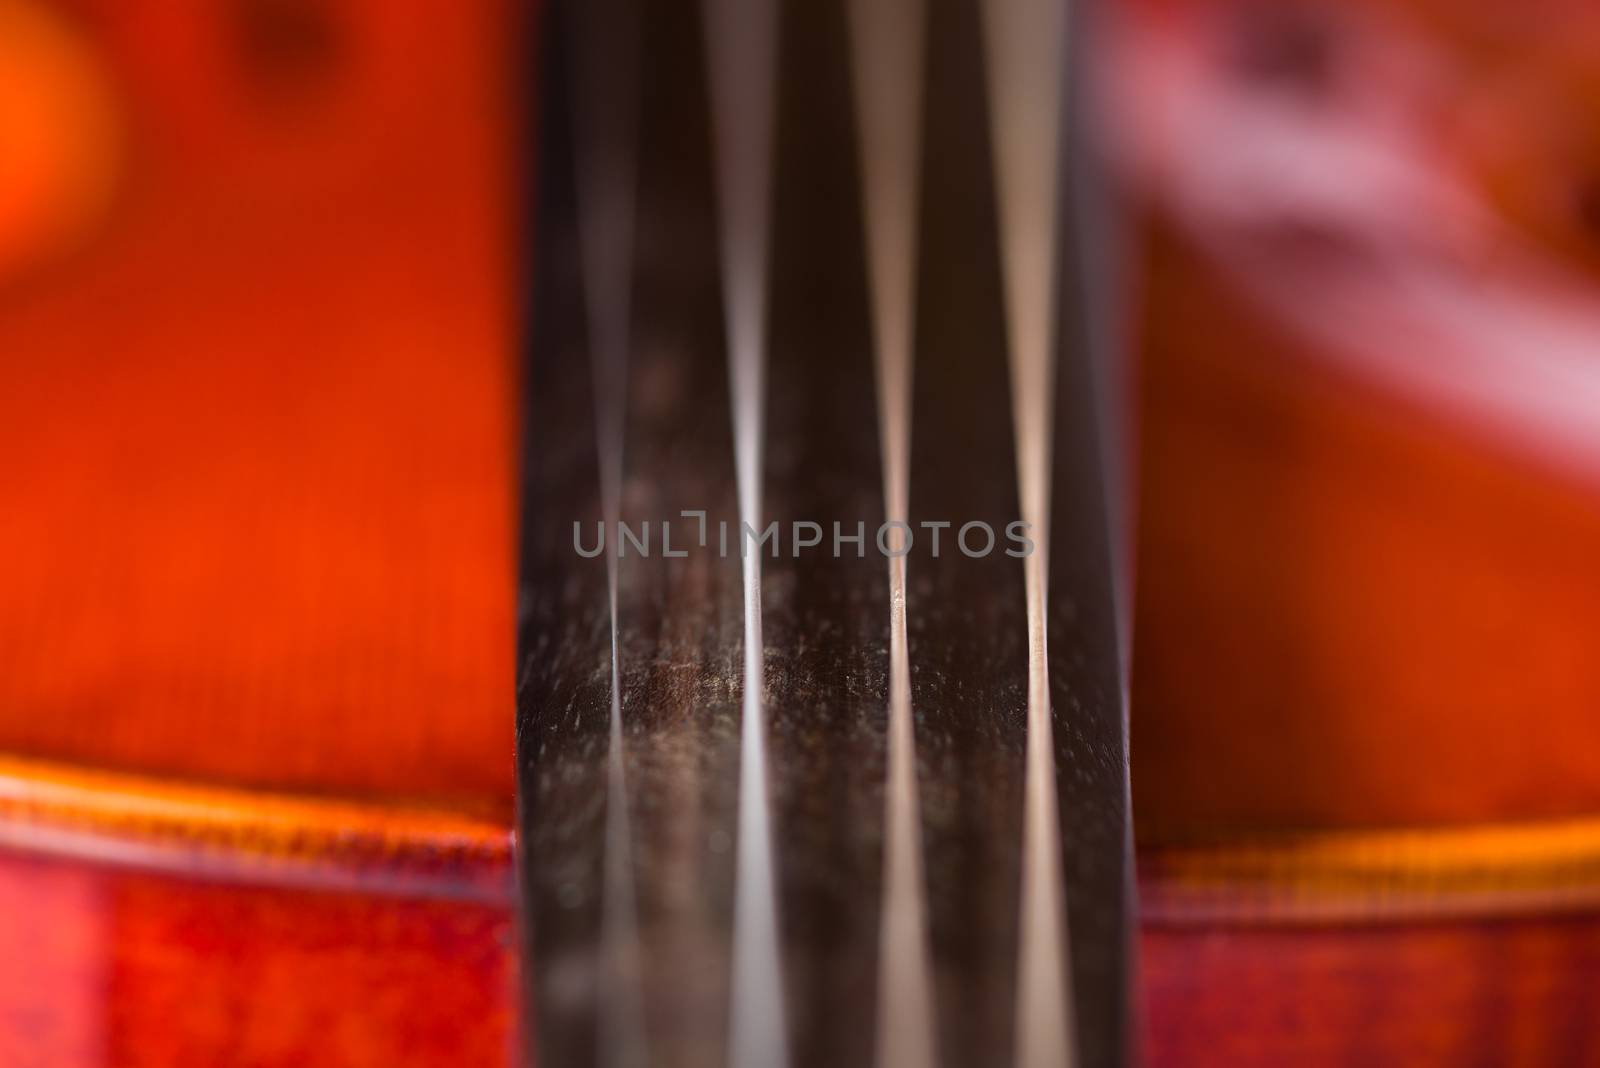 Close Up Violin by justtscott